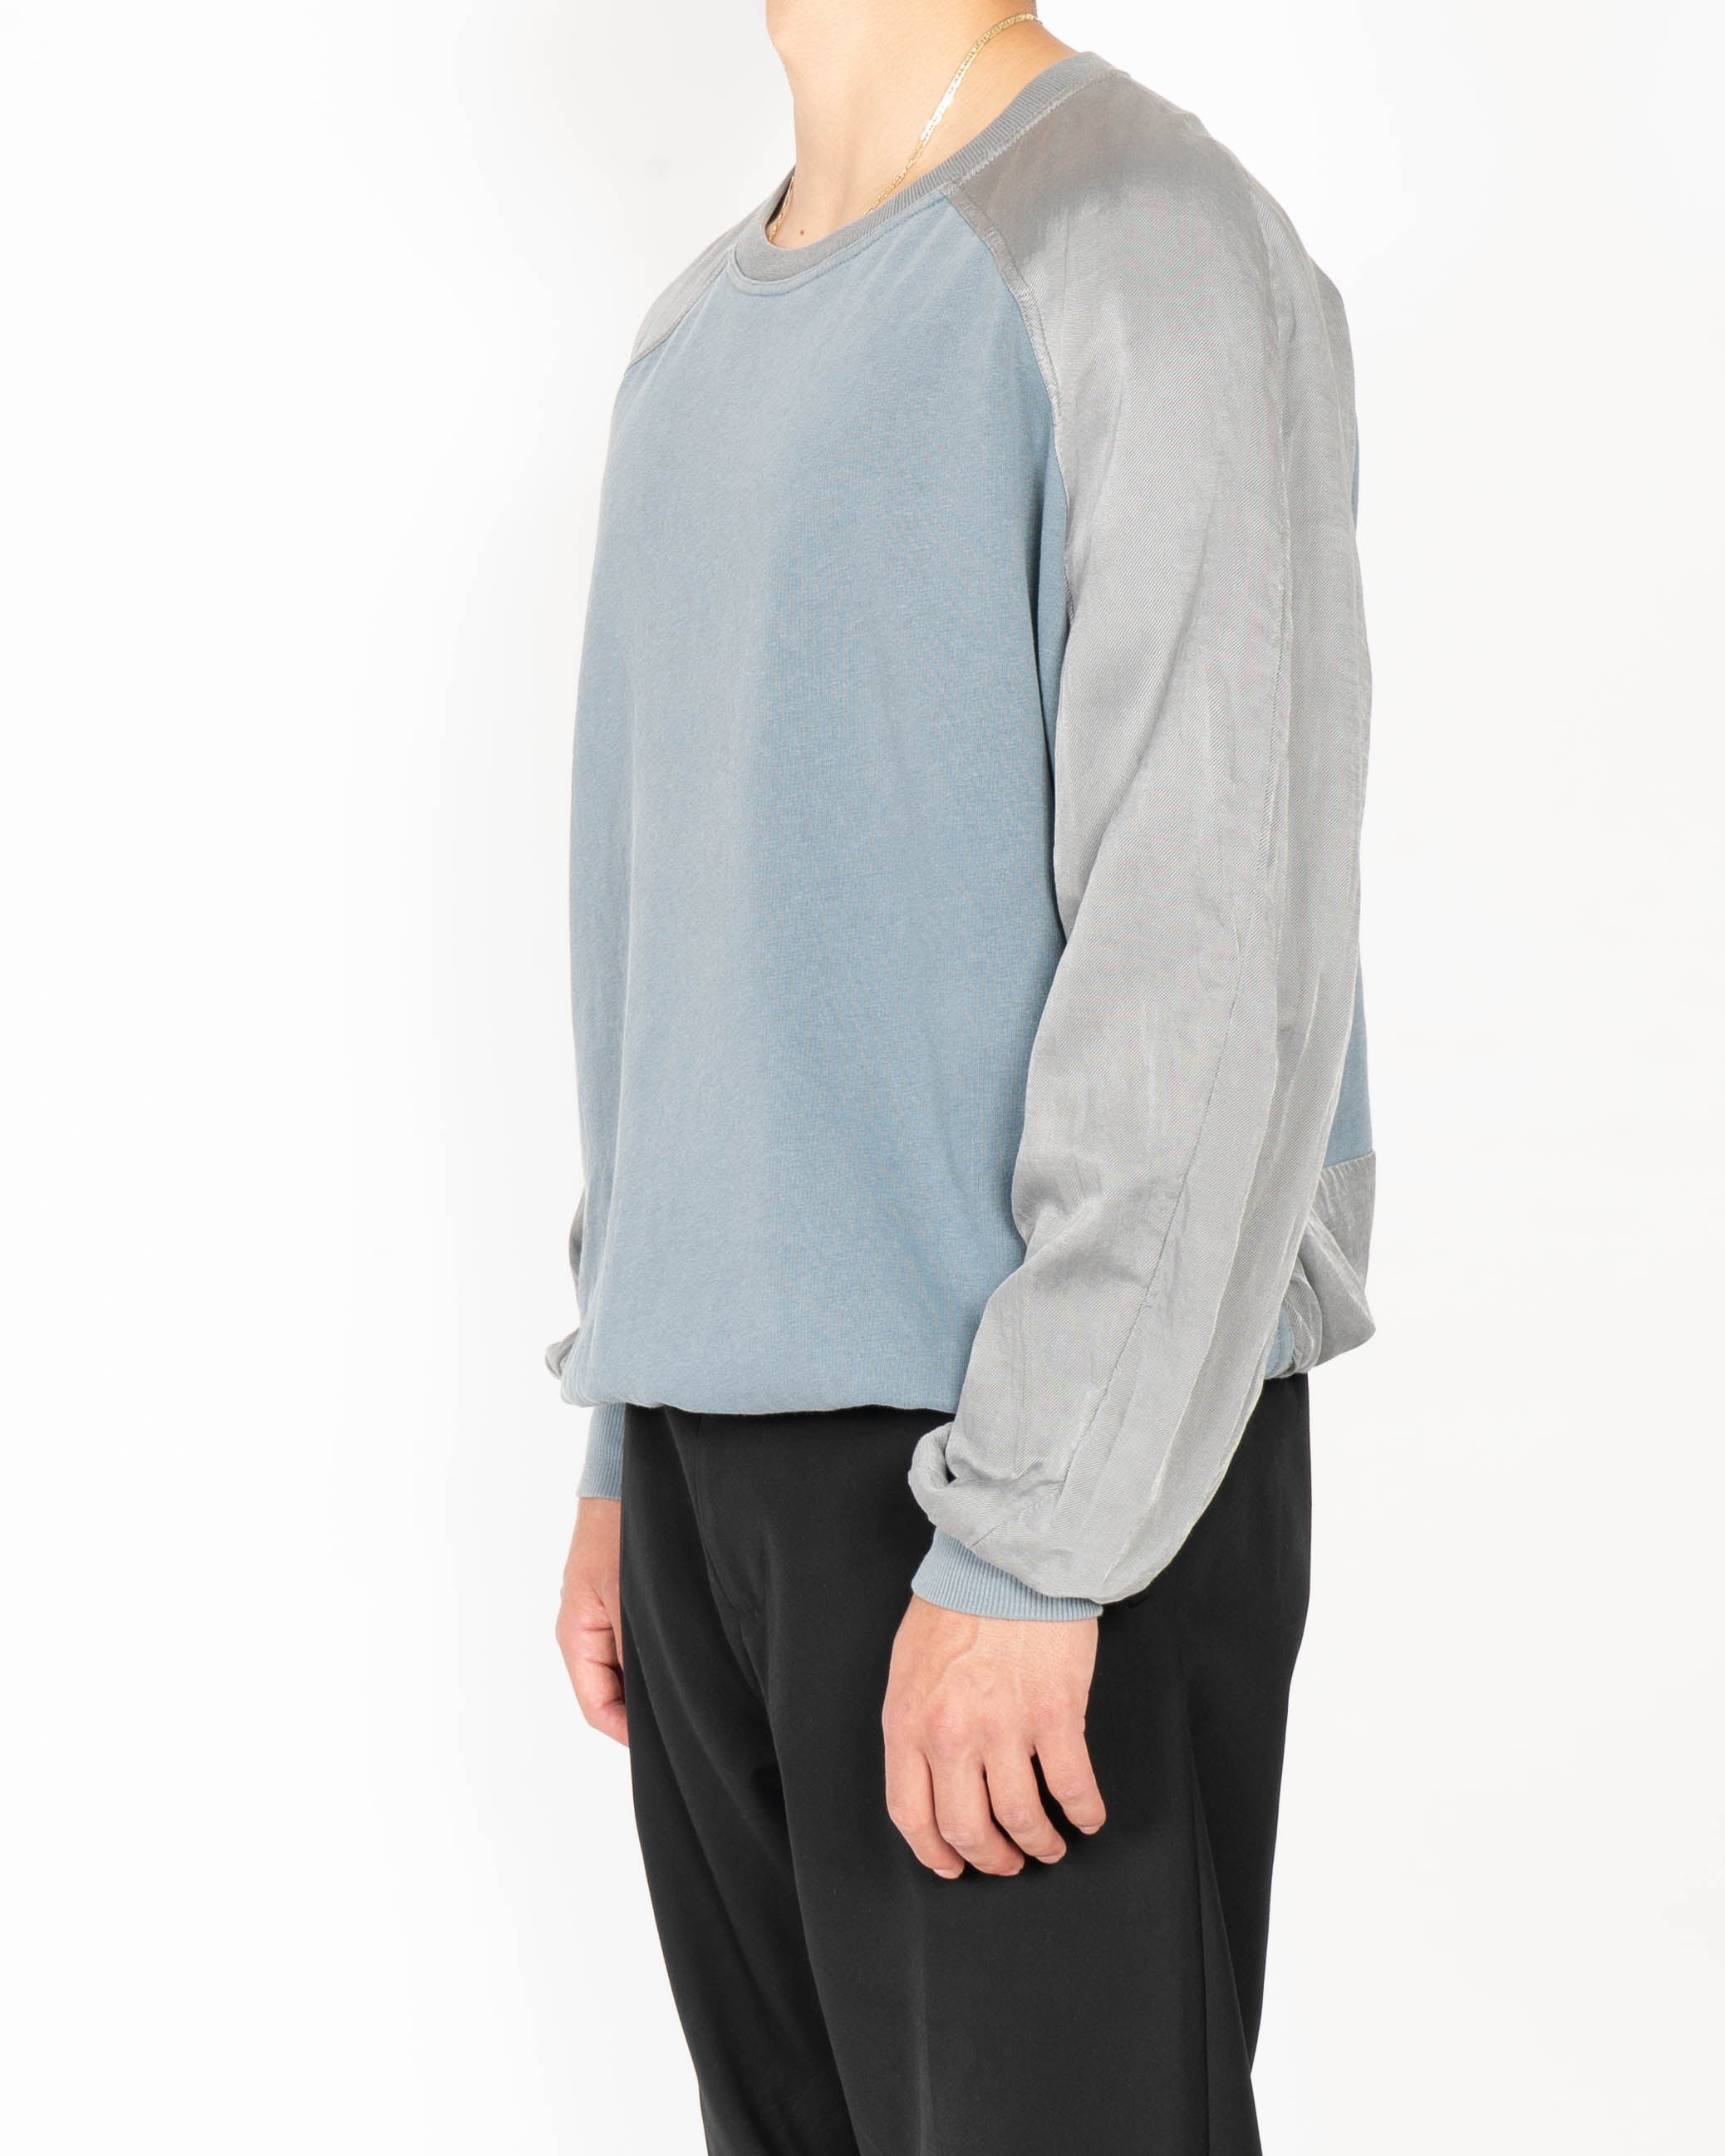 SS15 Panelled Crewneck in Cotton & Viscose